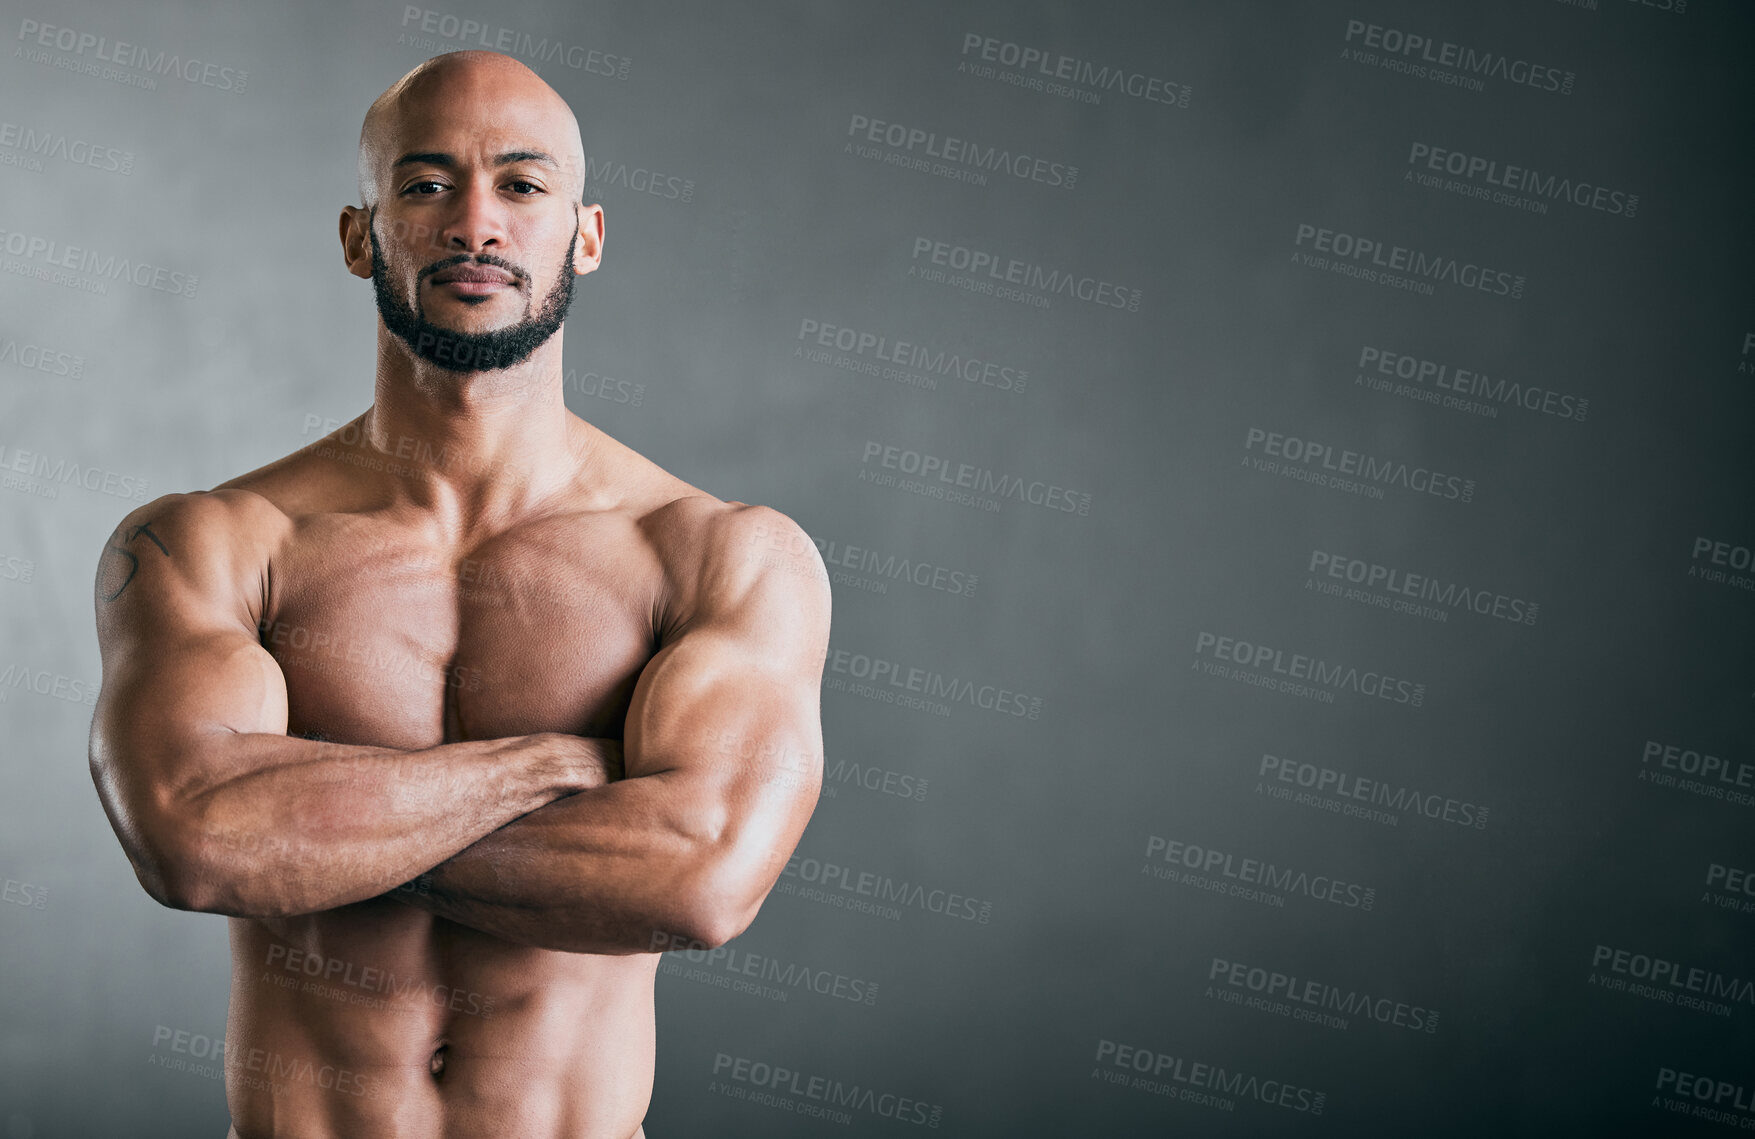 Buy stock photo Cropped portrait of a handsome young male athlete standing shirtless with his arms folded against a grey background